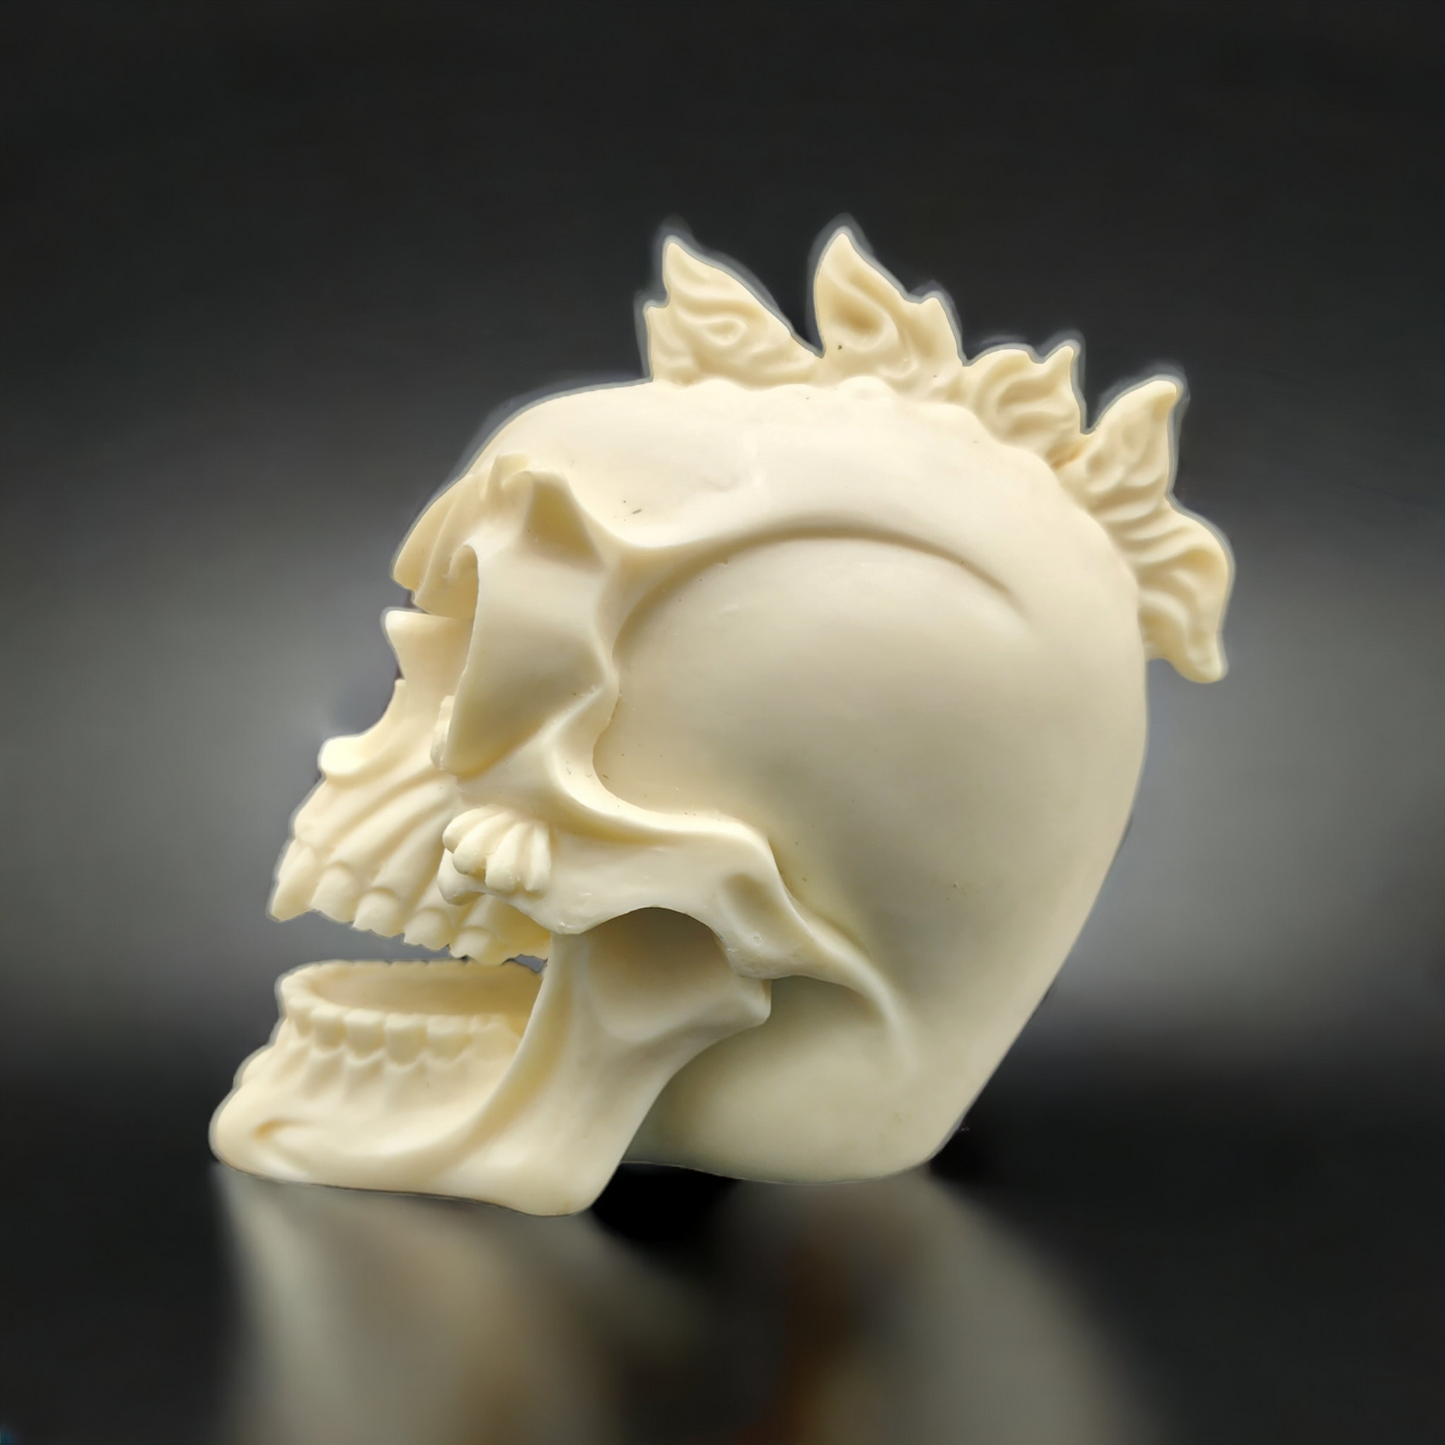 Handcrafted Tagua Ivory Nut Vampire Punk Skull Carving